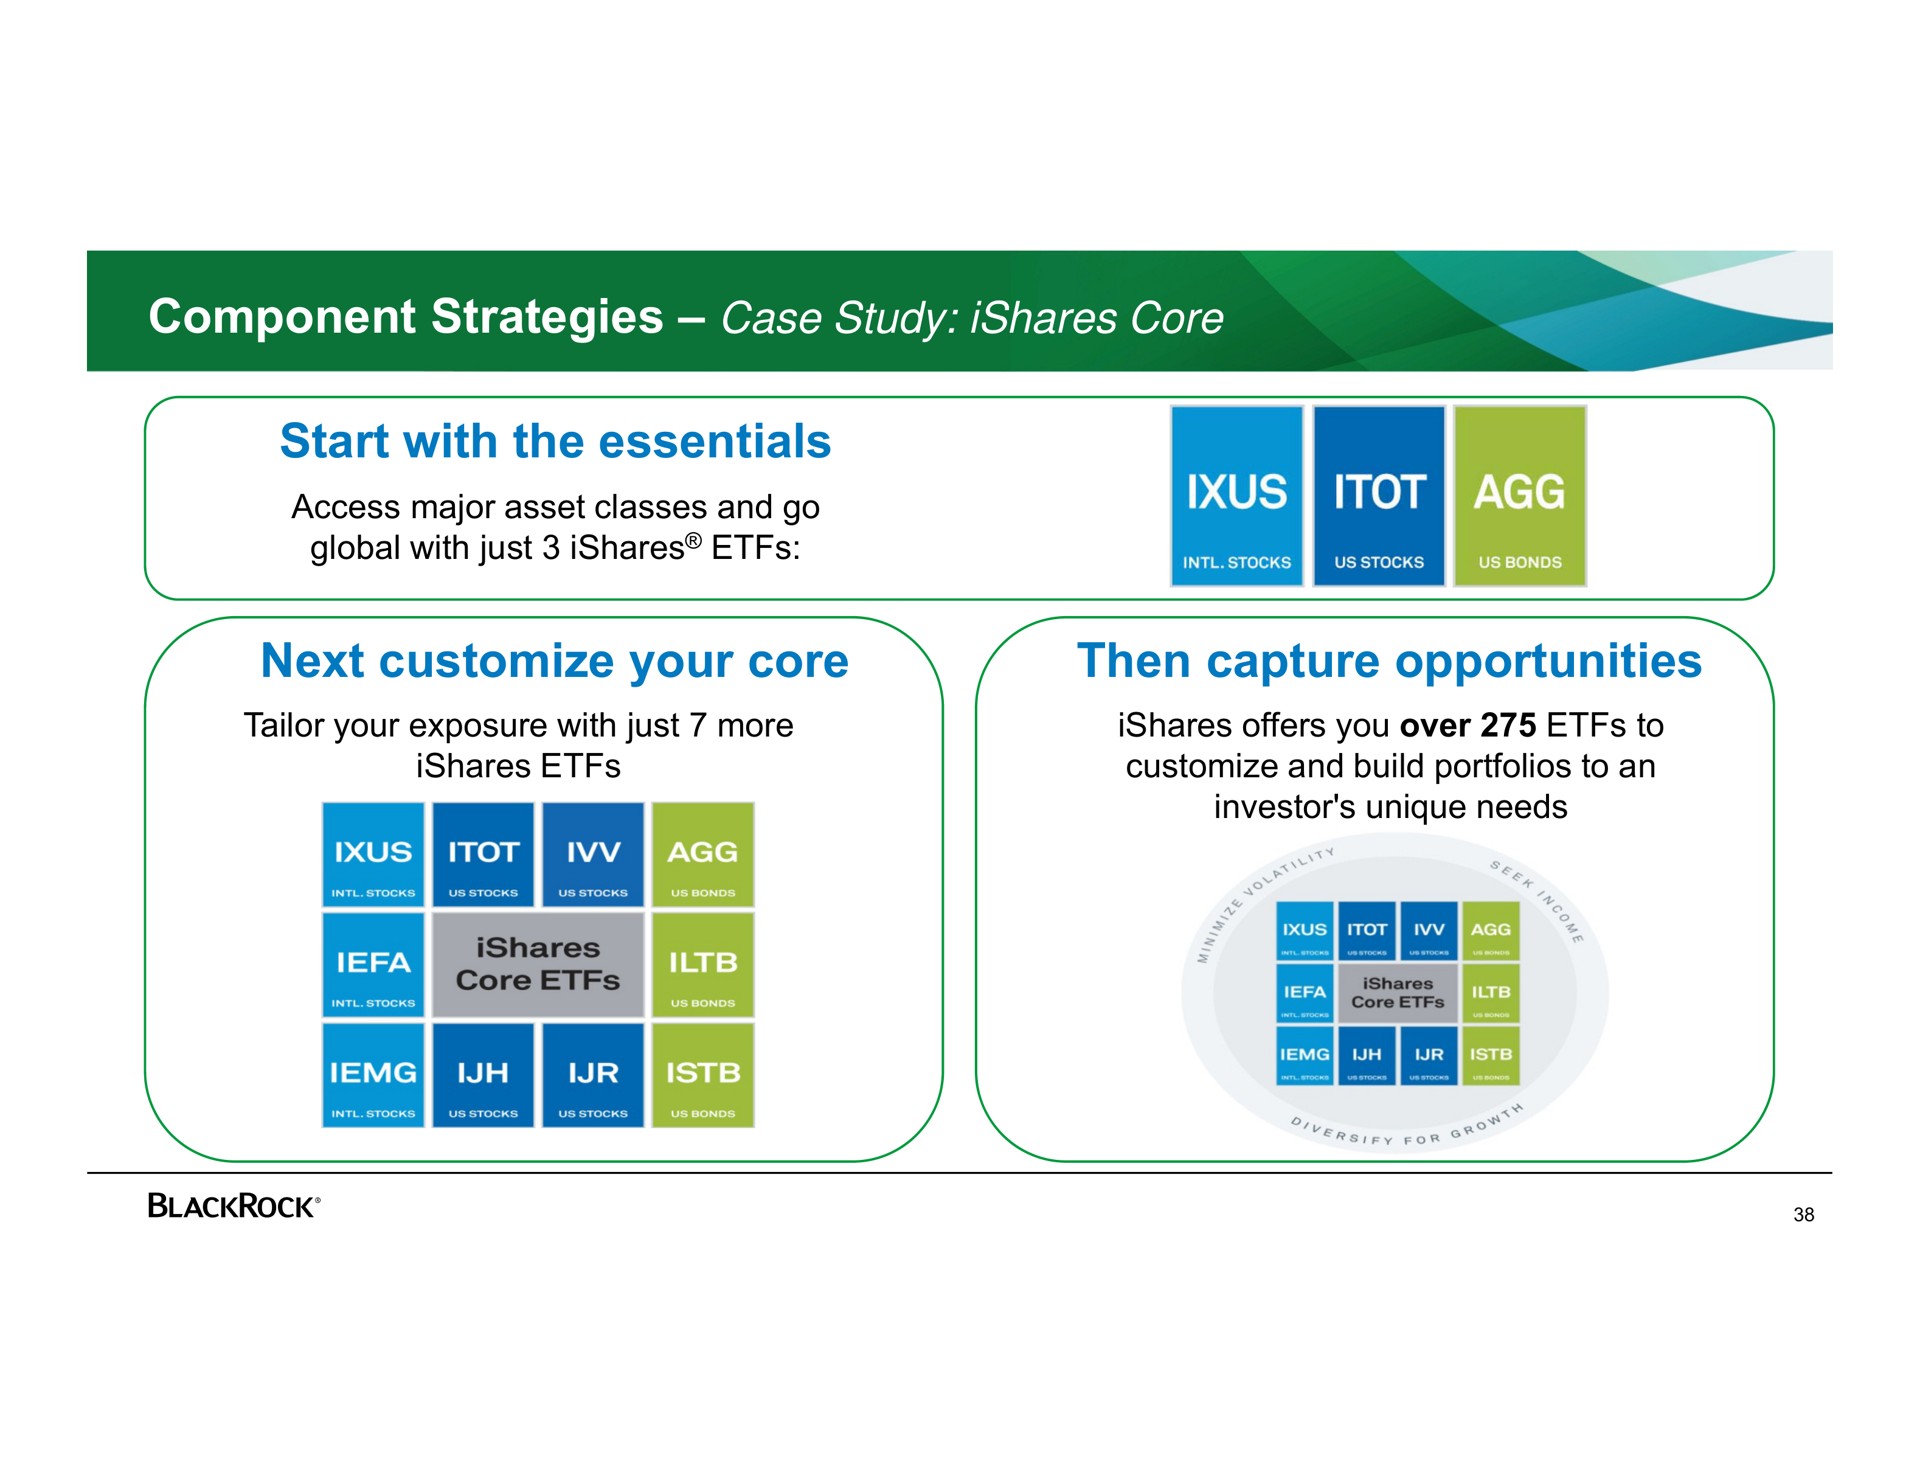 component strategies case study core start with the essentials next your core then capture opportunities | BlackRock